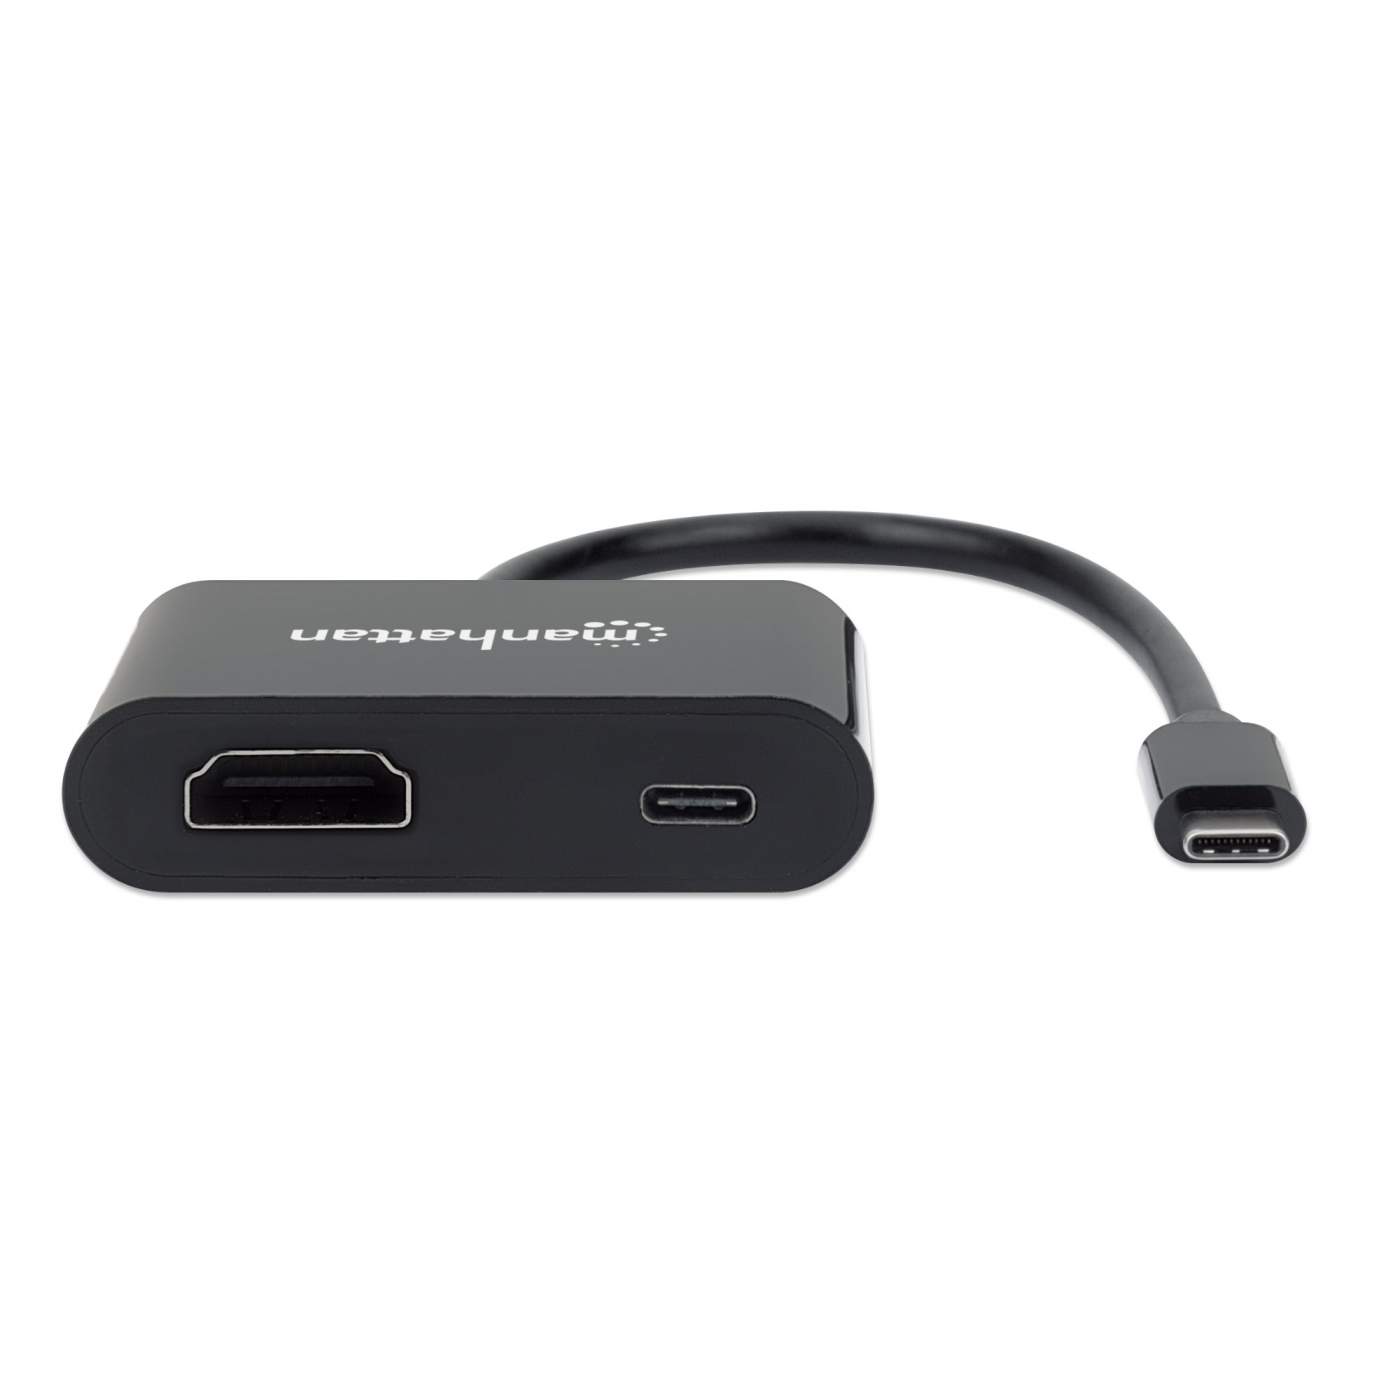 USB-C to HDMI Converter with Power Delivery Port Image 4